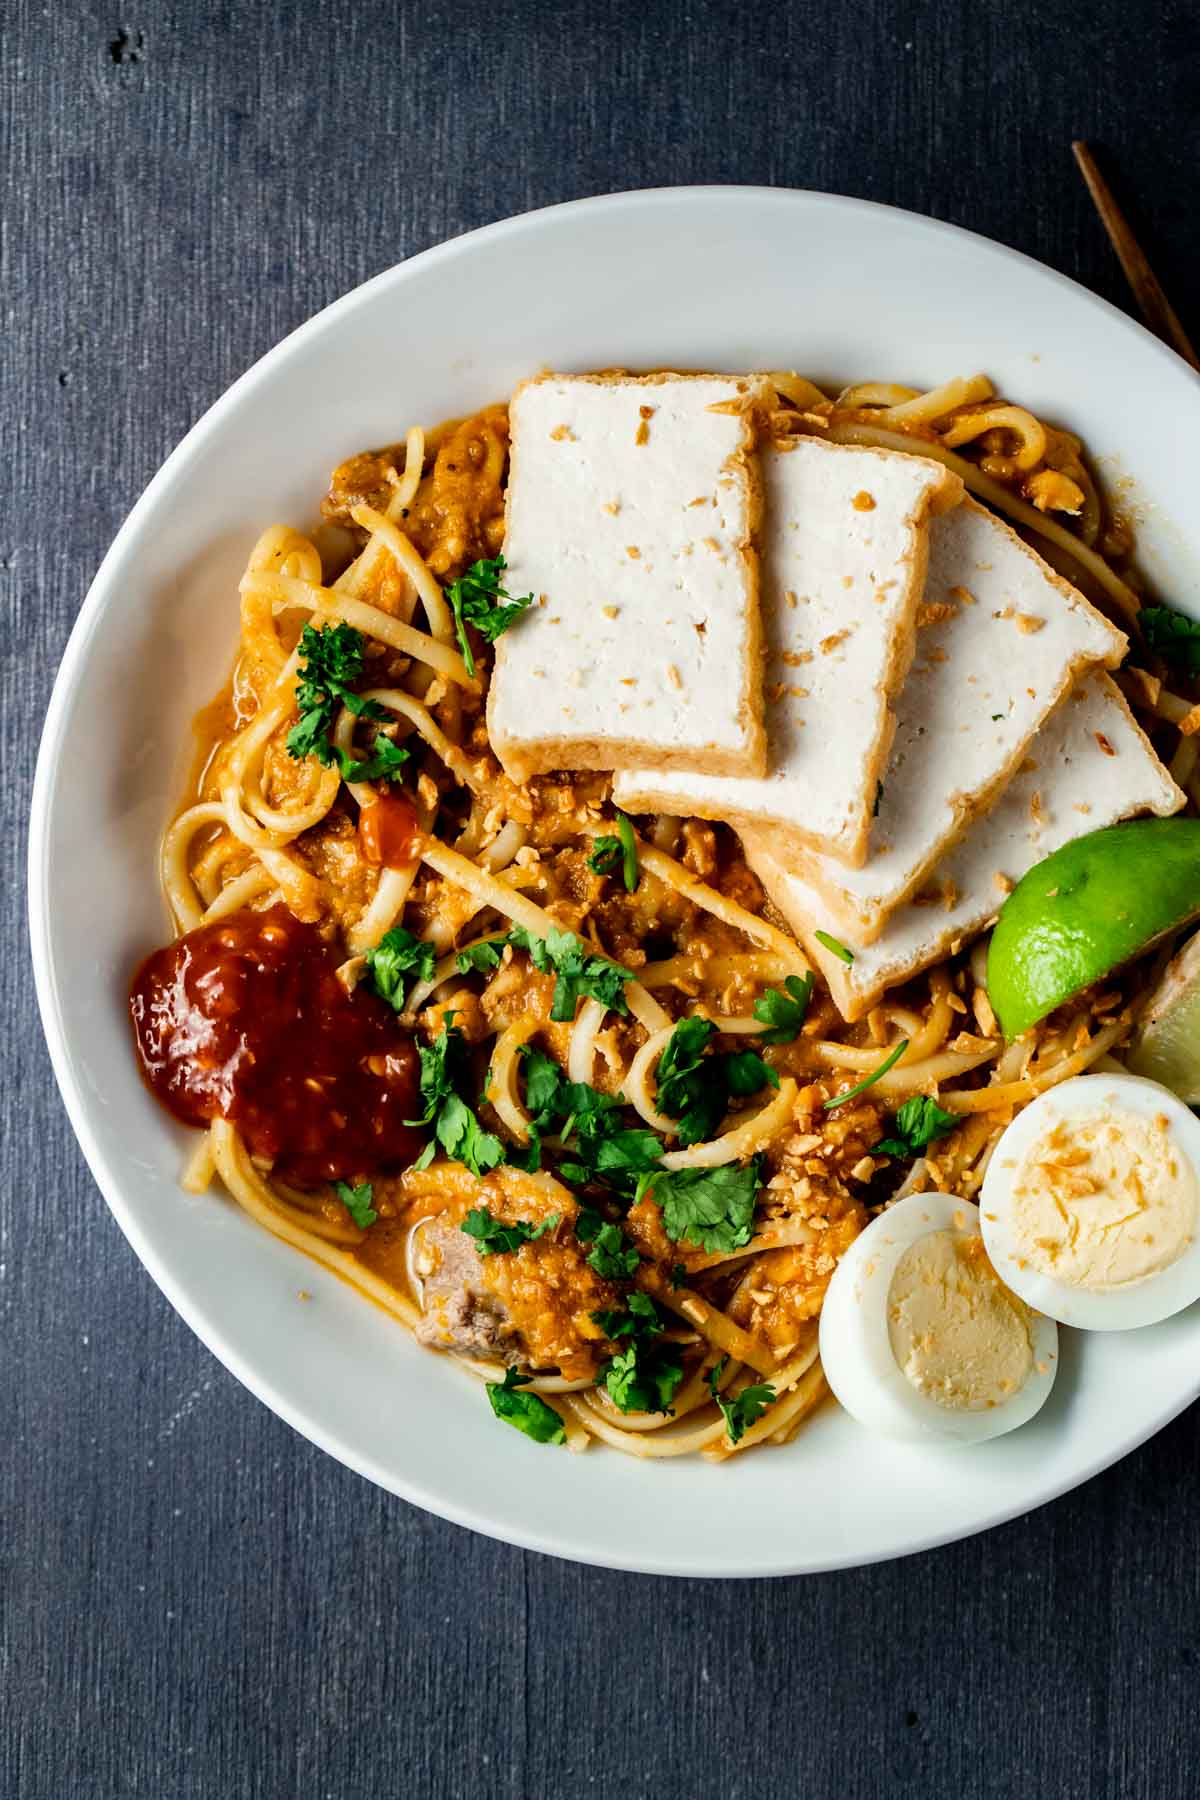 Overhead view of mee rebus in a bowl with tofu, hard boiled eggs and sambal.